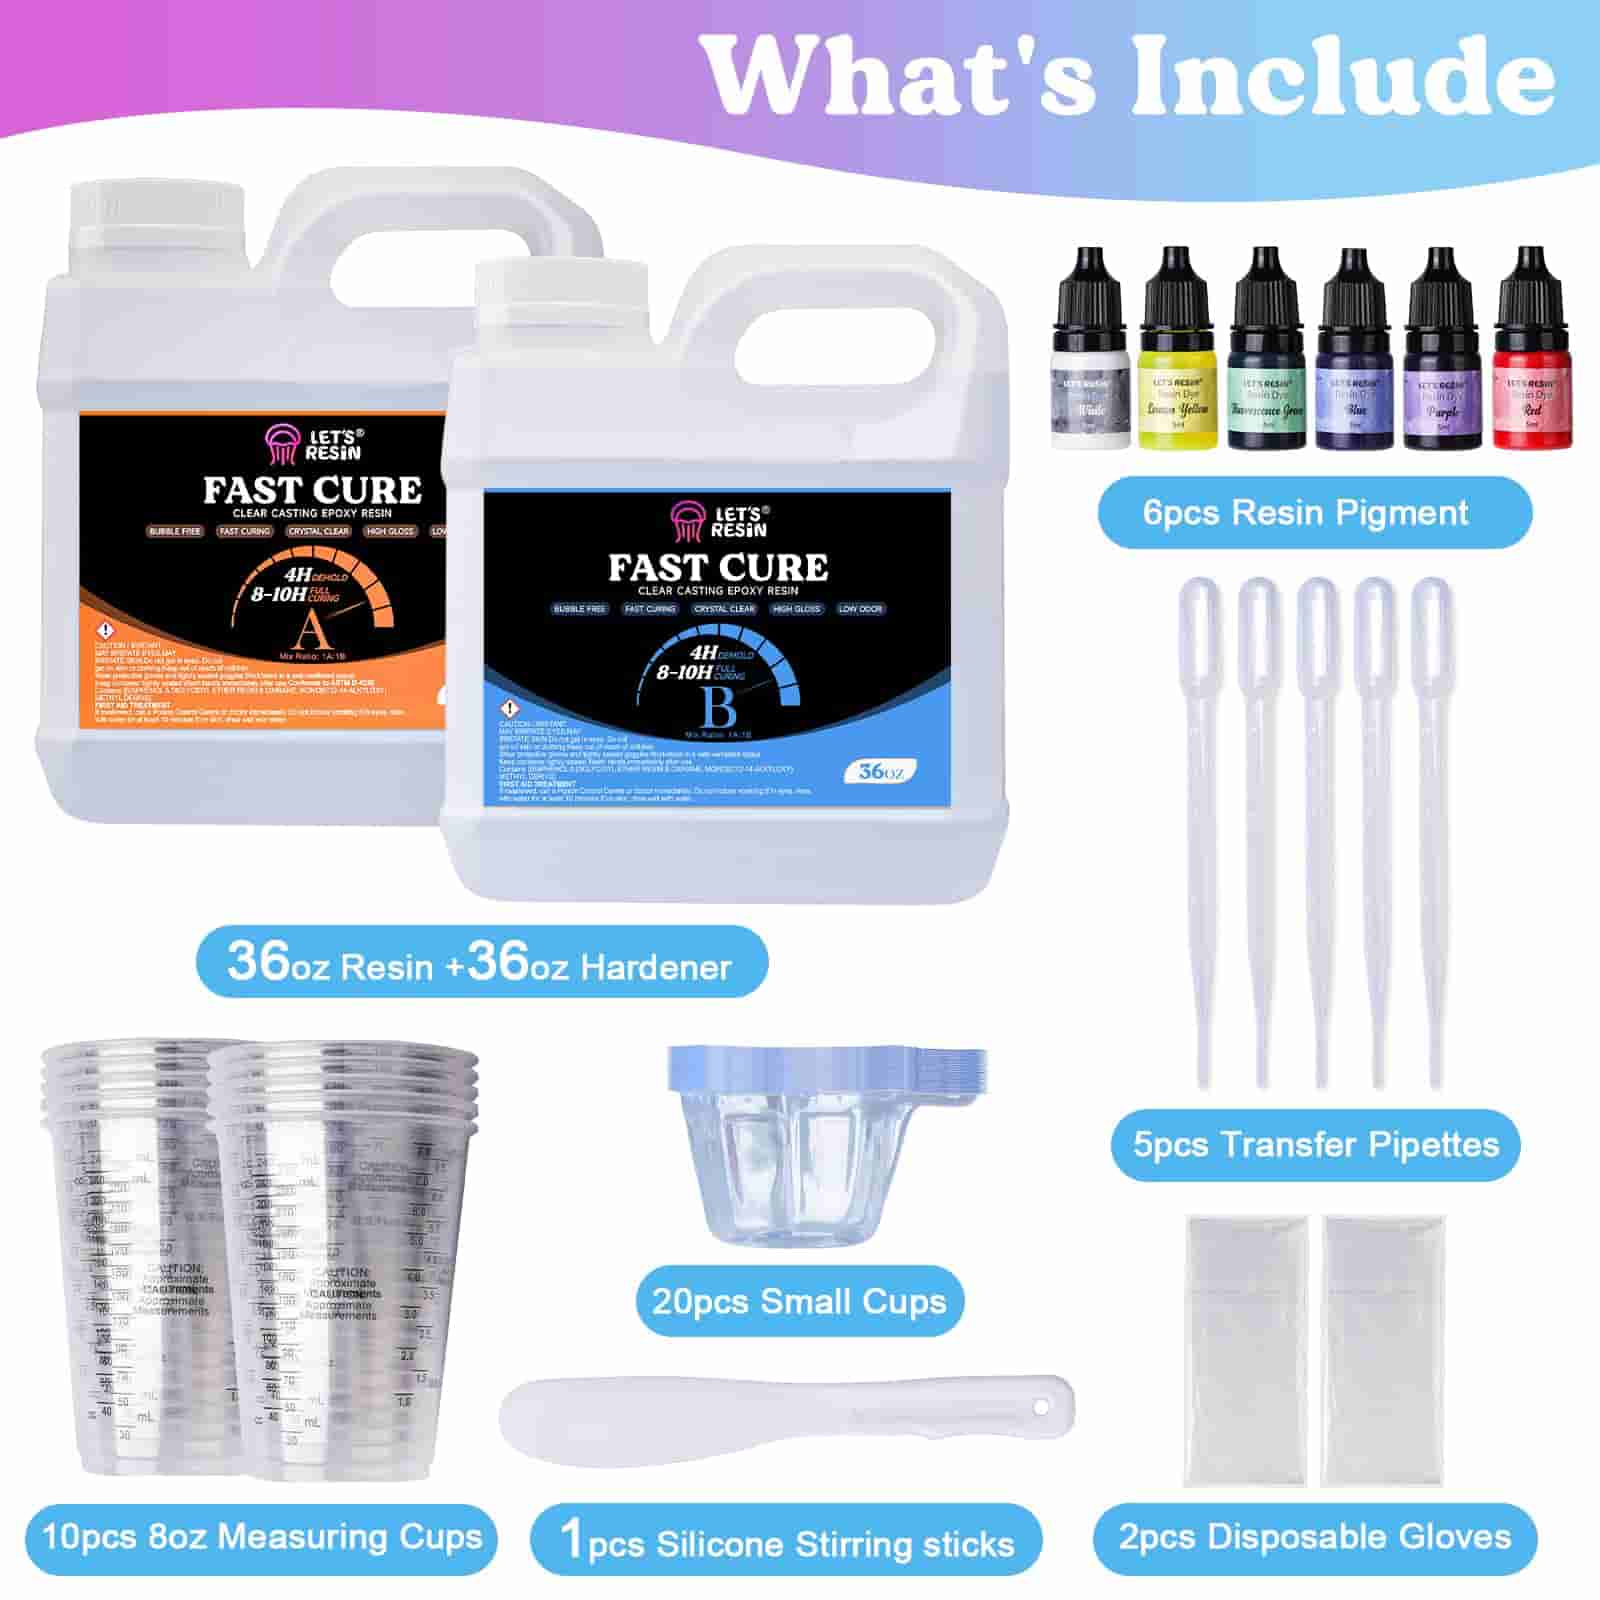 Dr. Resin Clear Epoxy Resin Art Resin Kit 16oz Crystal Jewelry Resin 2 Part Epoxy Resin Kit with Bonus Measuring Cups Sticks and Gloves